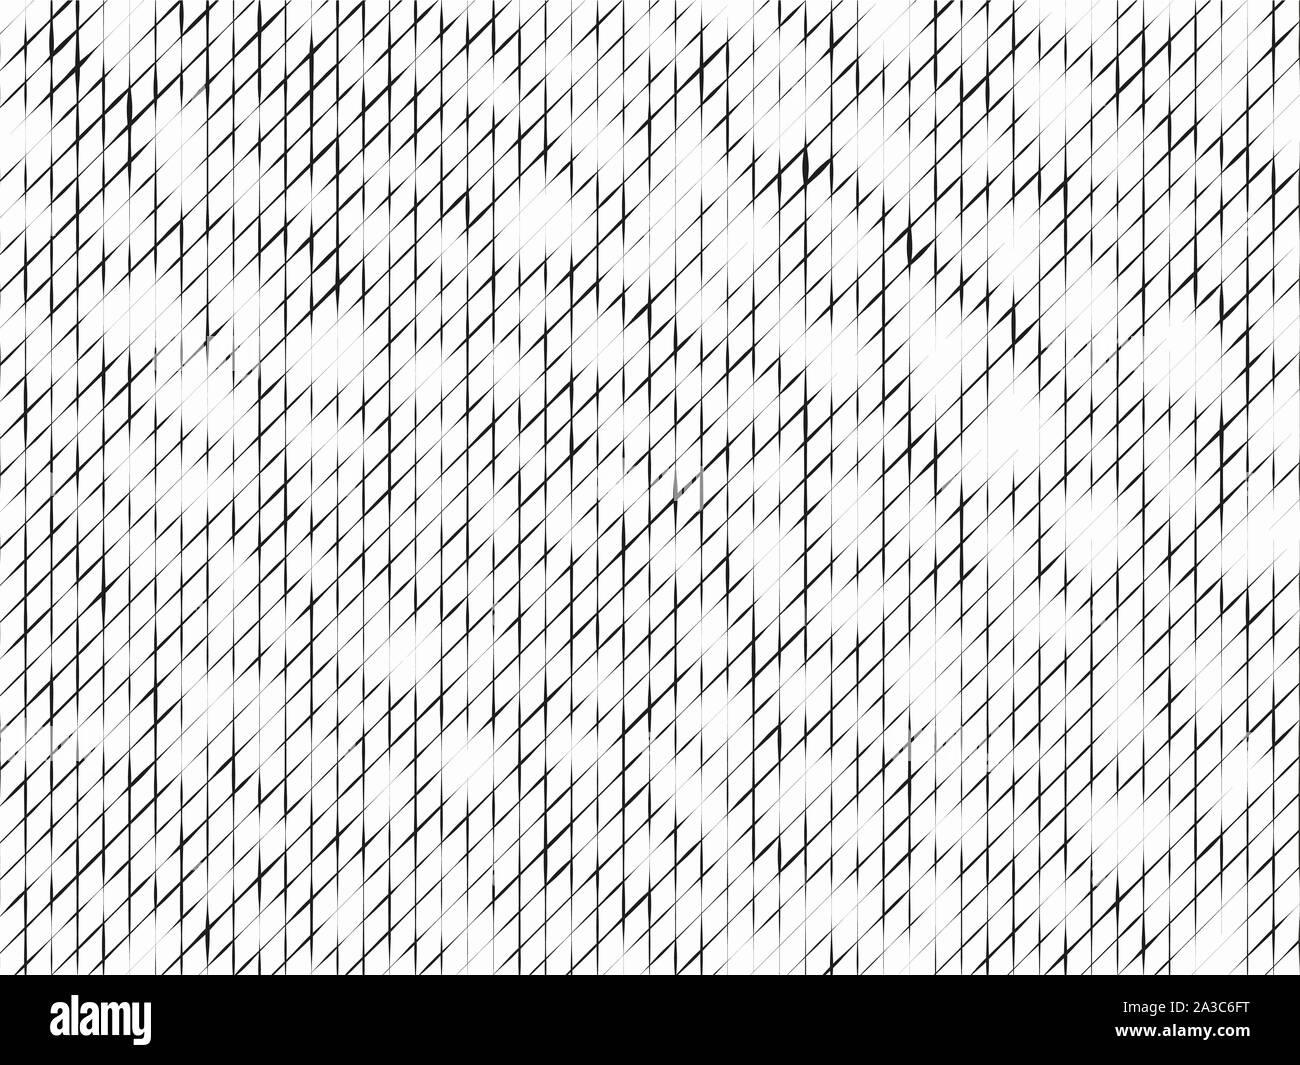 Abstract geometric pattern with diagonal overlapping stripes and crossing lines in black and white. Op art geometric background. Simple monochrome texture. Stock Vector